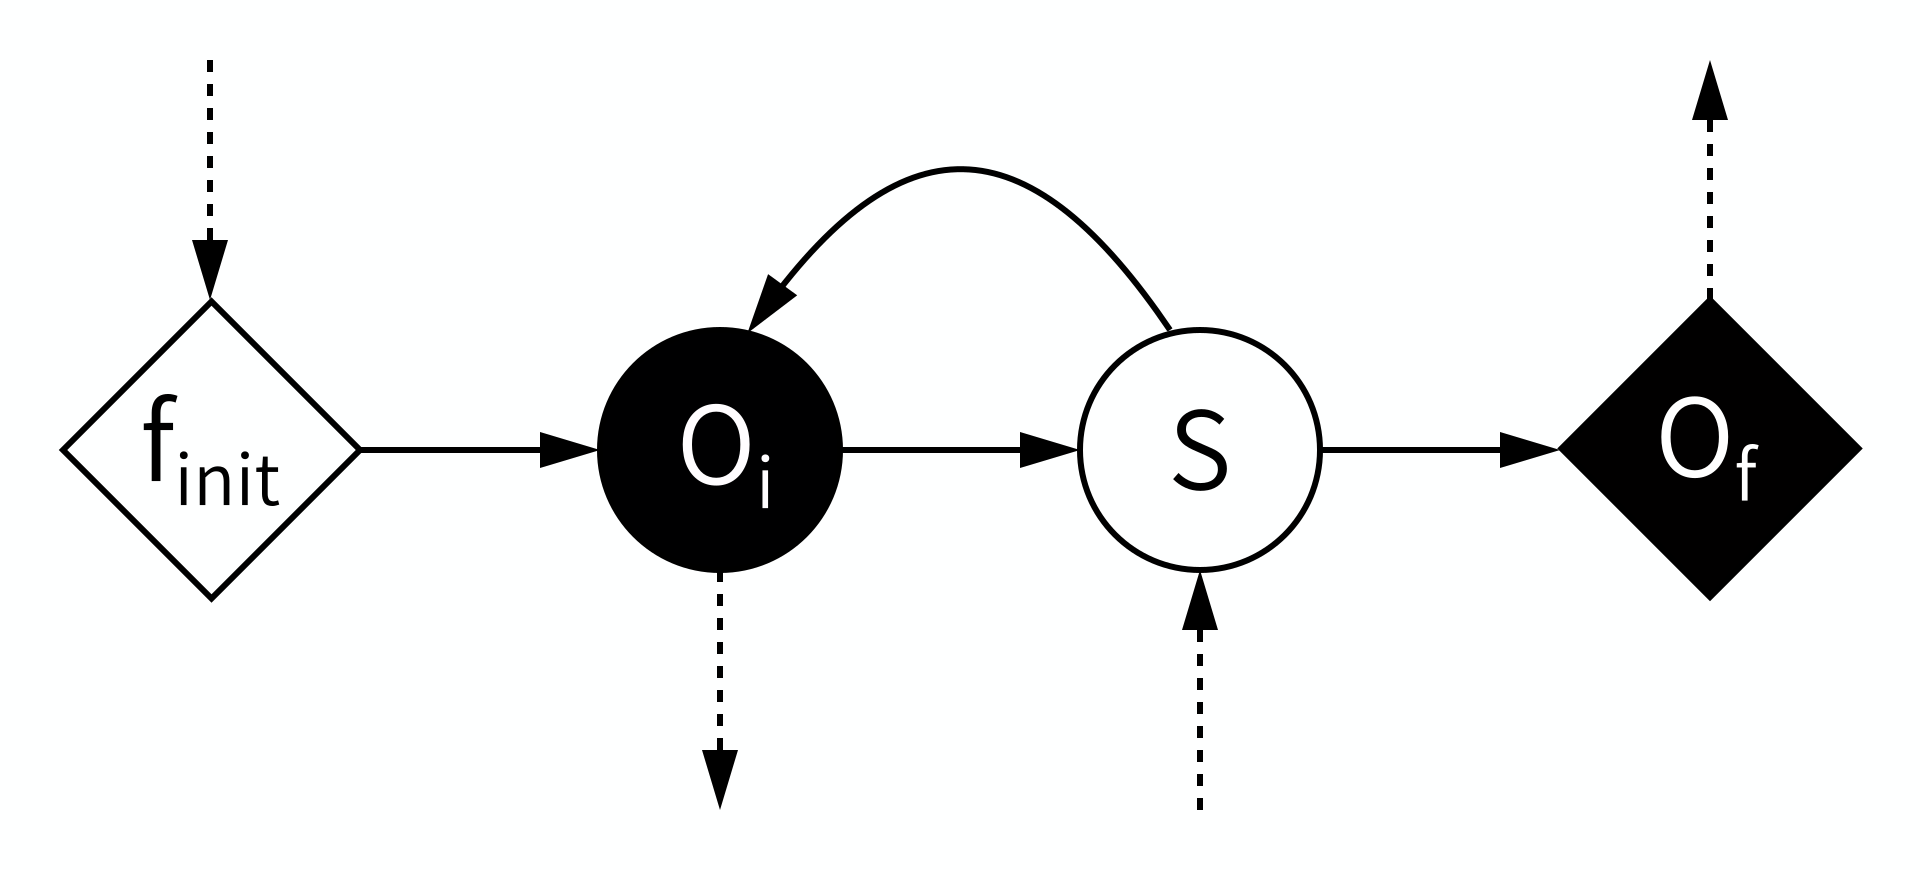 Diagram showing a diamond marked f init, a circle marked O i, another circle marked S, and another diamond marked O f connected by arrows in order. Another arrow loops back from S to O i. A dashed arrow points into f init, another dashed arrow points away from O i, another points into S and a fourth dashed arrow points away from O f. The circle marked O i and the diamond marked O f are white on black, the others black on white.